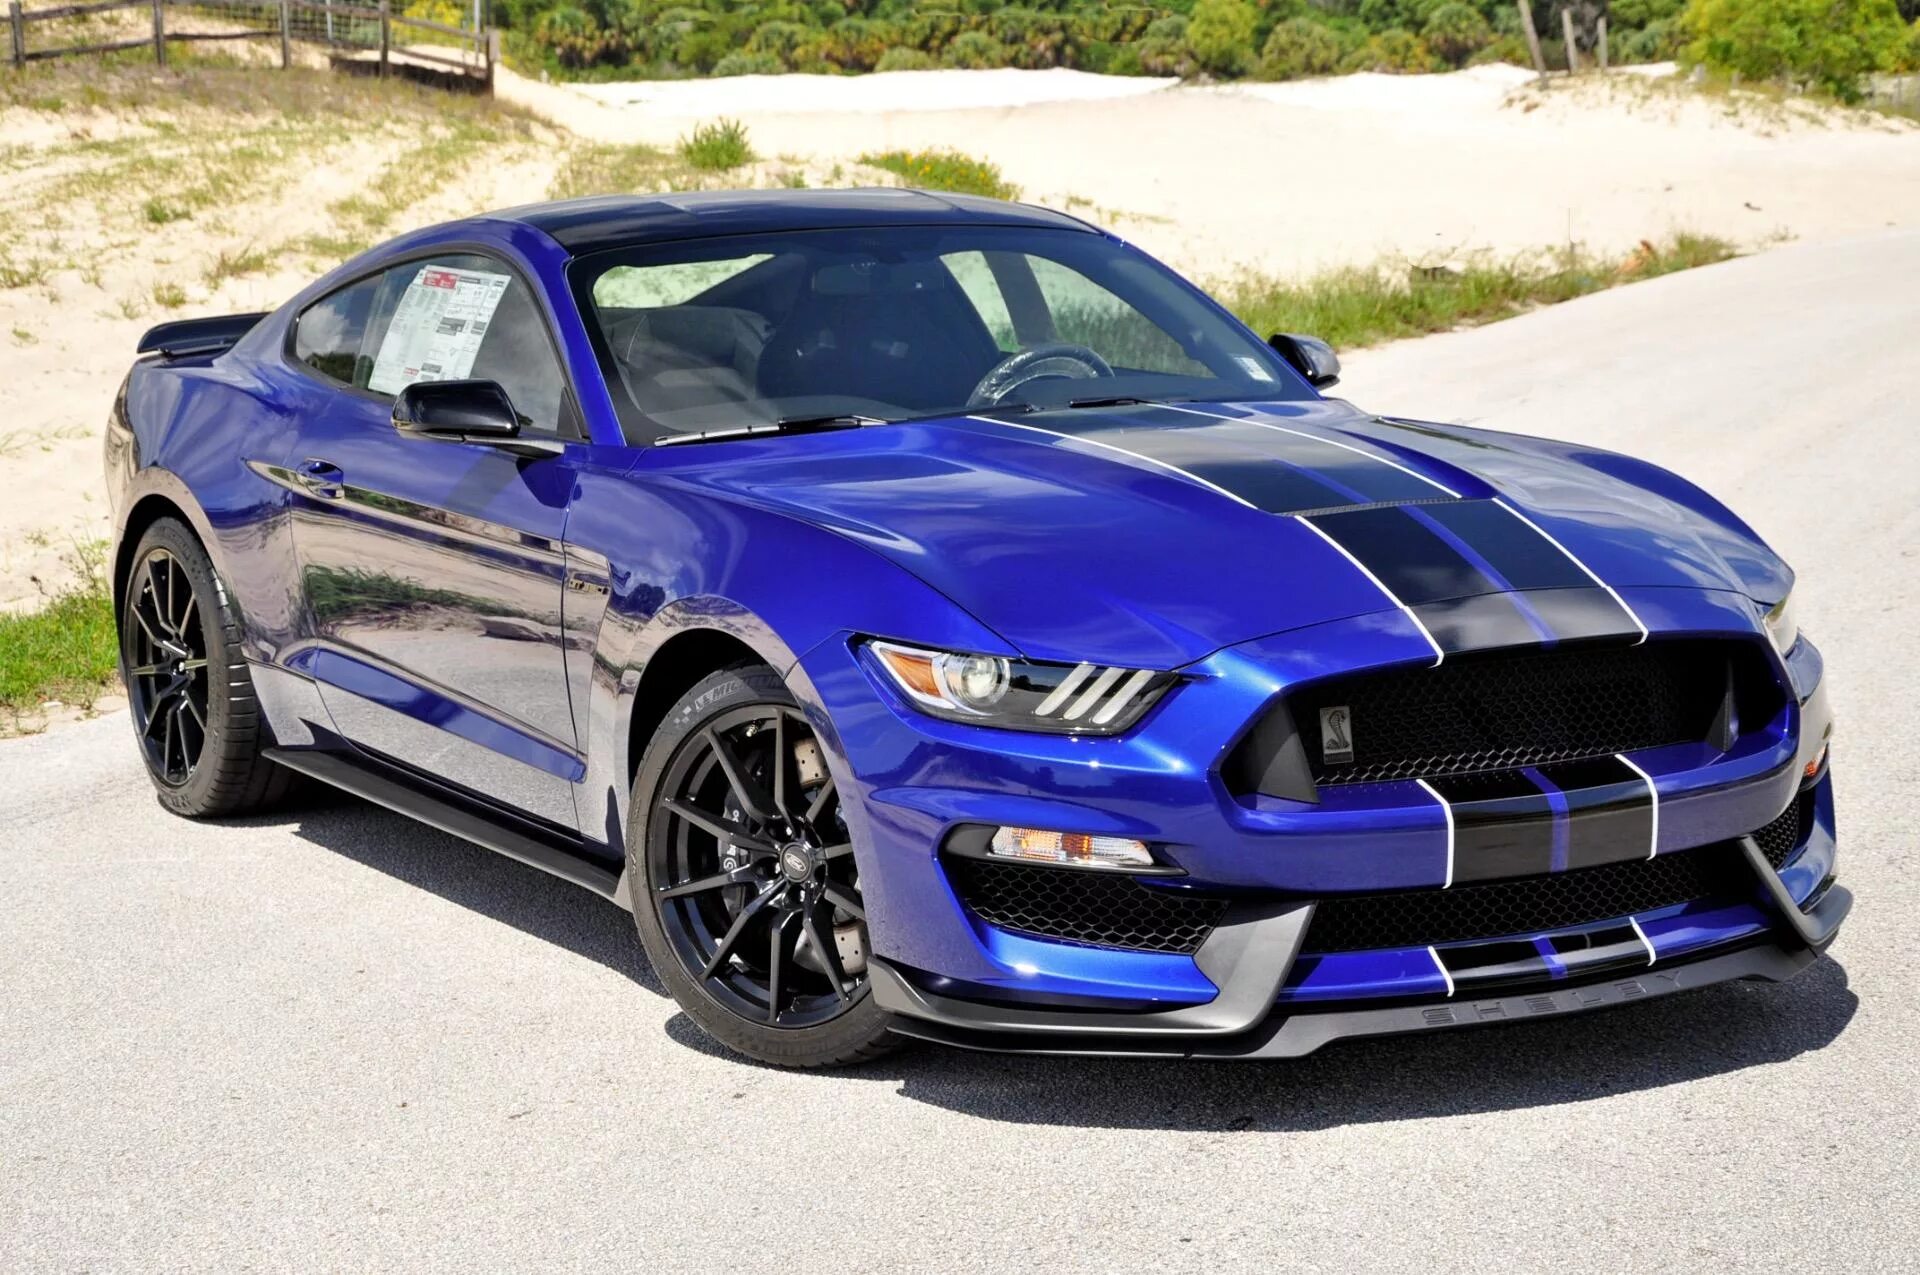 Мустанг цена. Ford Mustang gt 2015. Ford Mustang gt 350. Форд Мустанг Шелби 2015. Ford Mustang Shelby gt 2015.